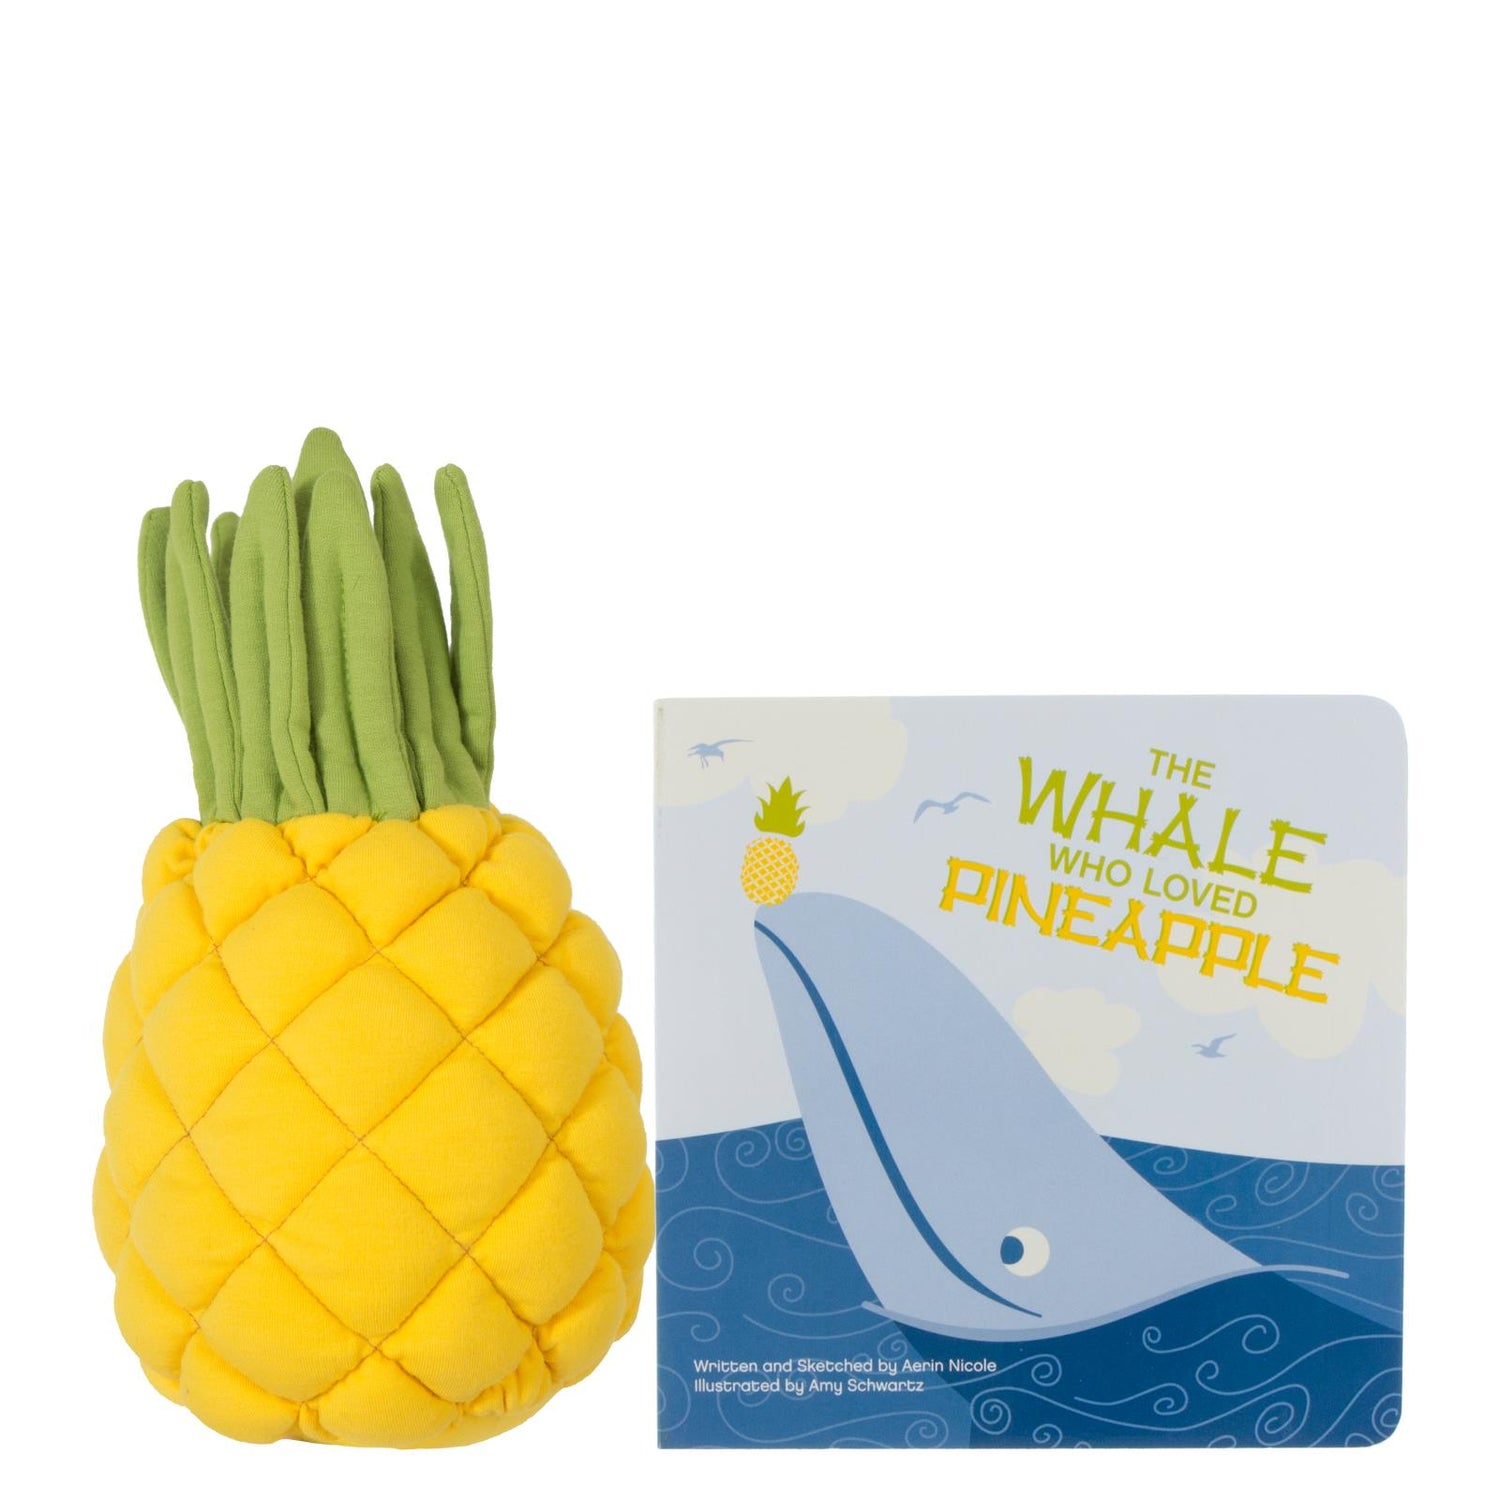 Book & Plush Combo in The Whale Who Loved Pineapple with Pineapple Plush